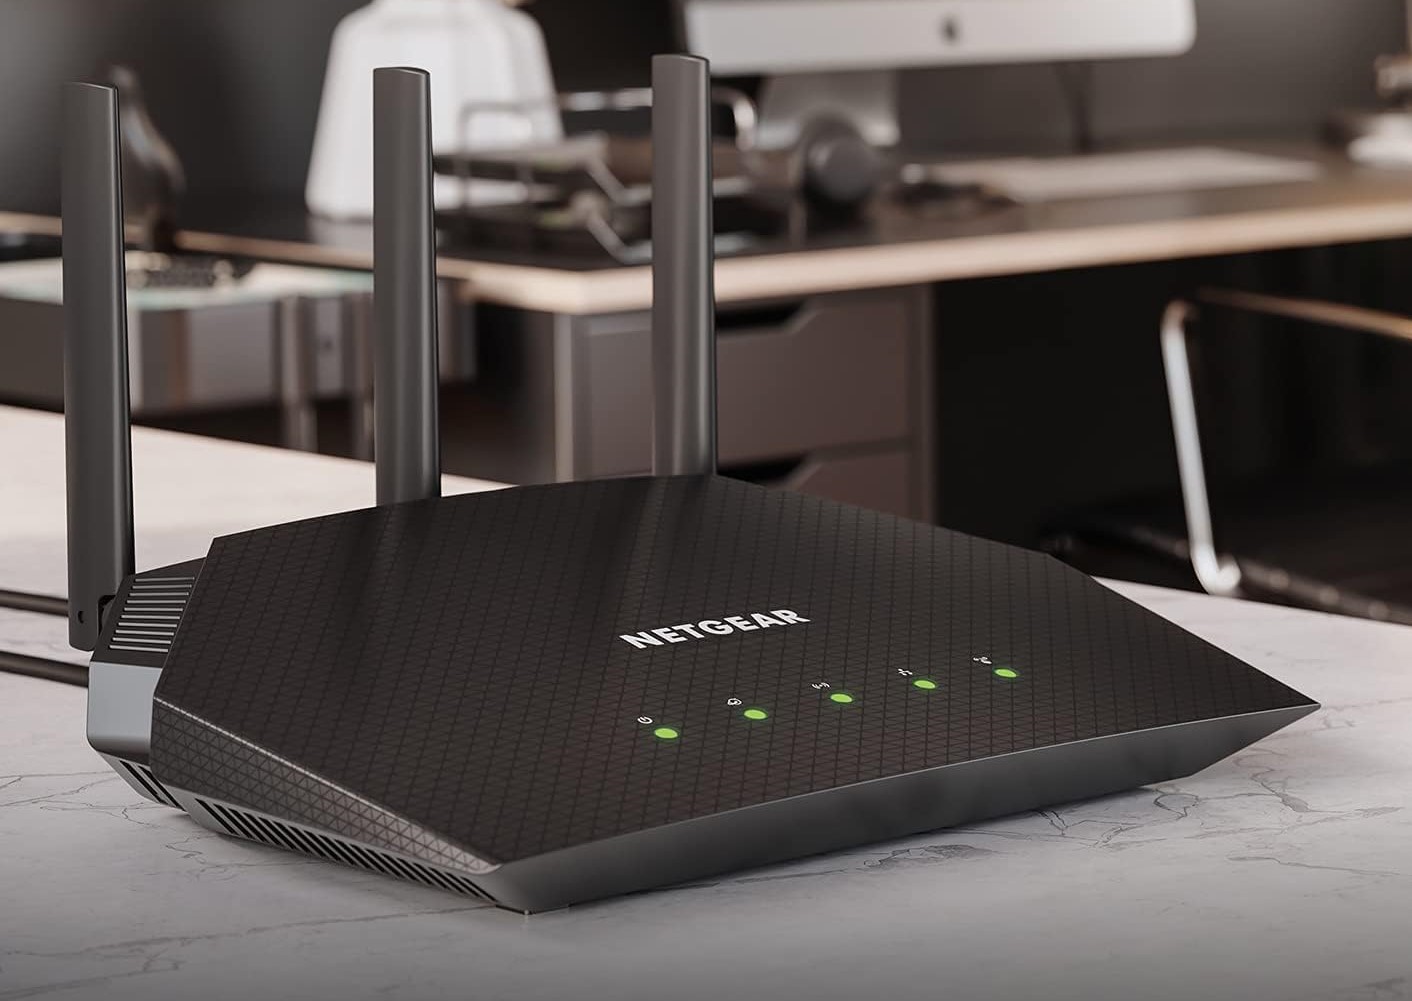 What Is The Best Wi-Fi Router For Streaming